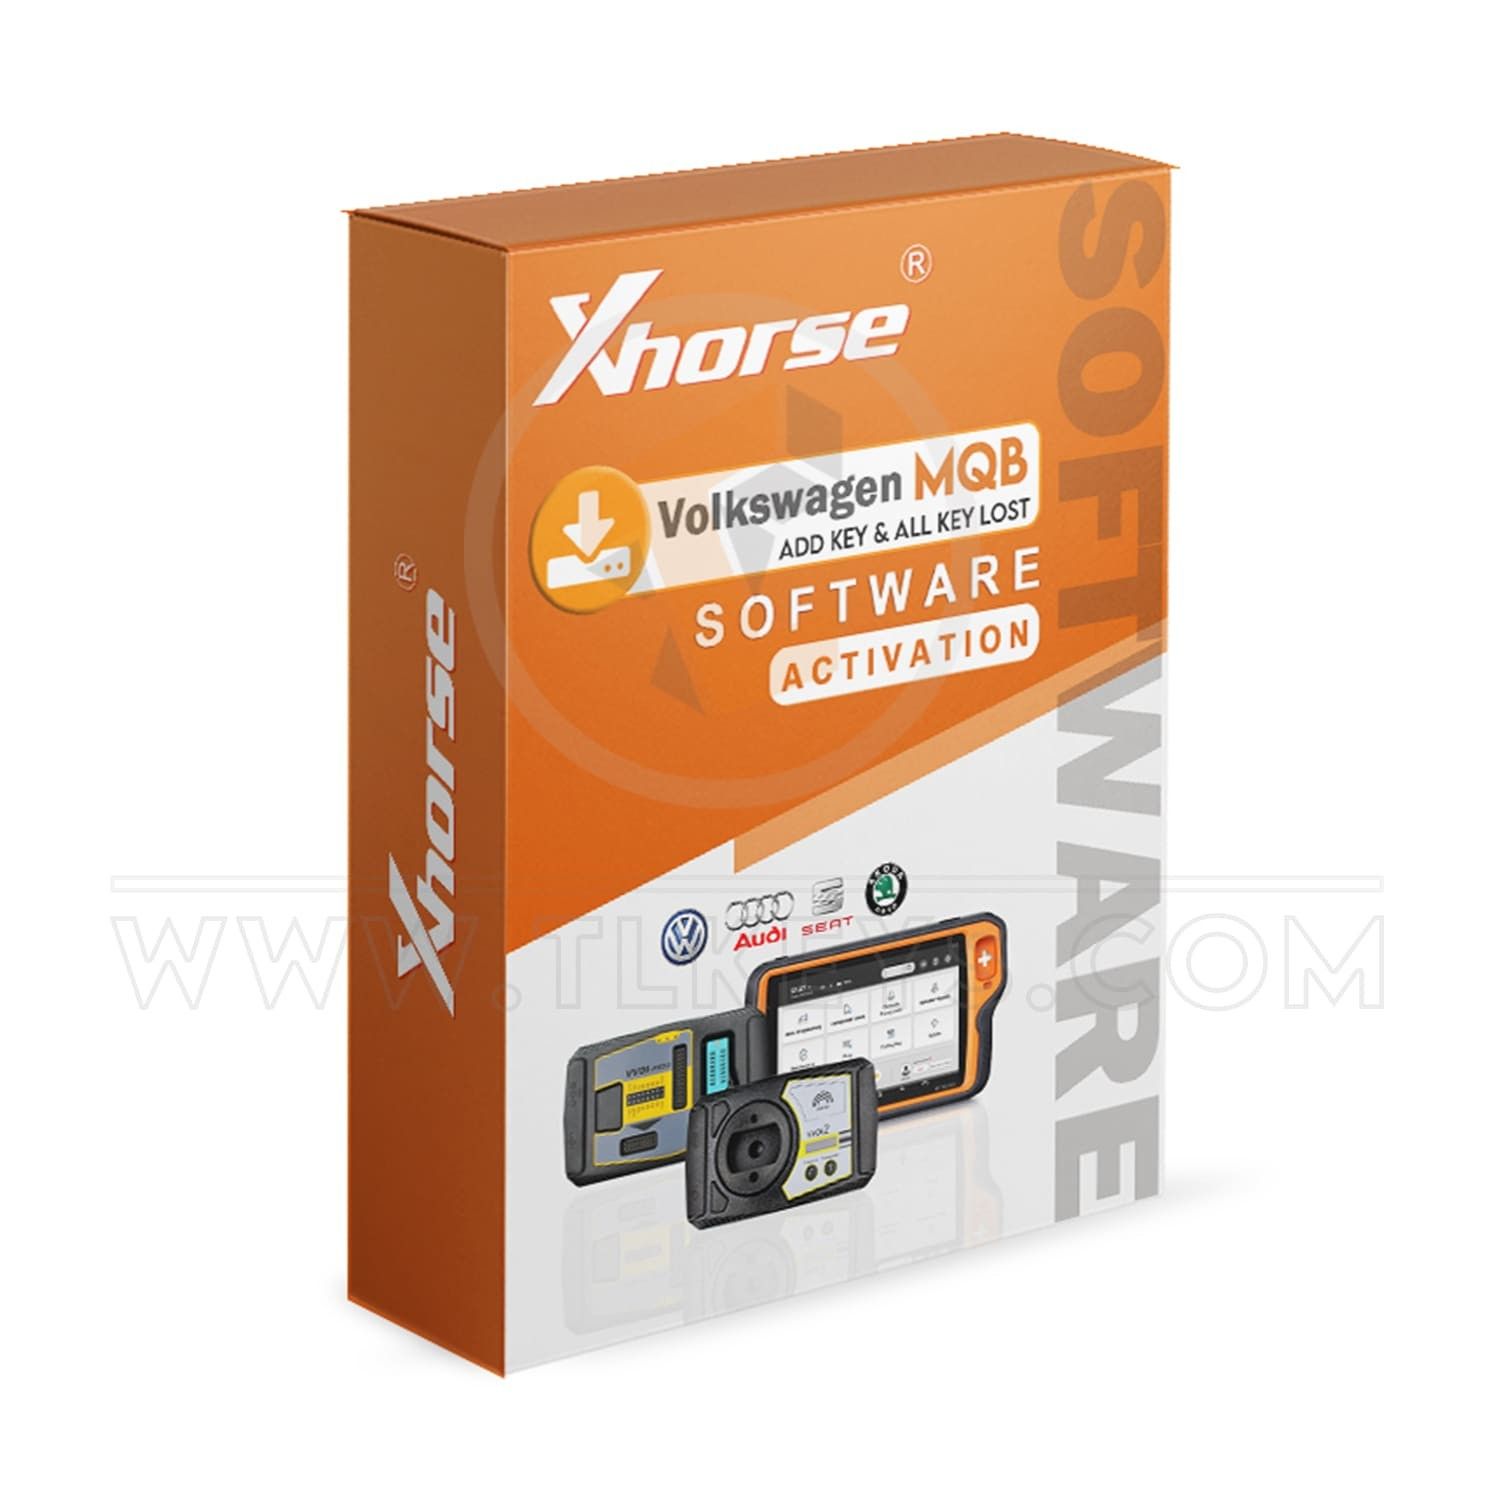 Xhorse Volkswagen MQB Support Add Key And All Key Lost software